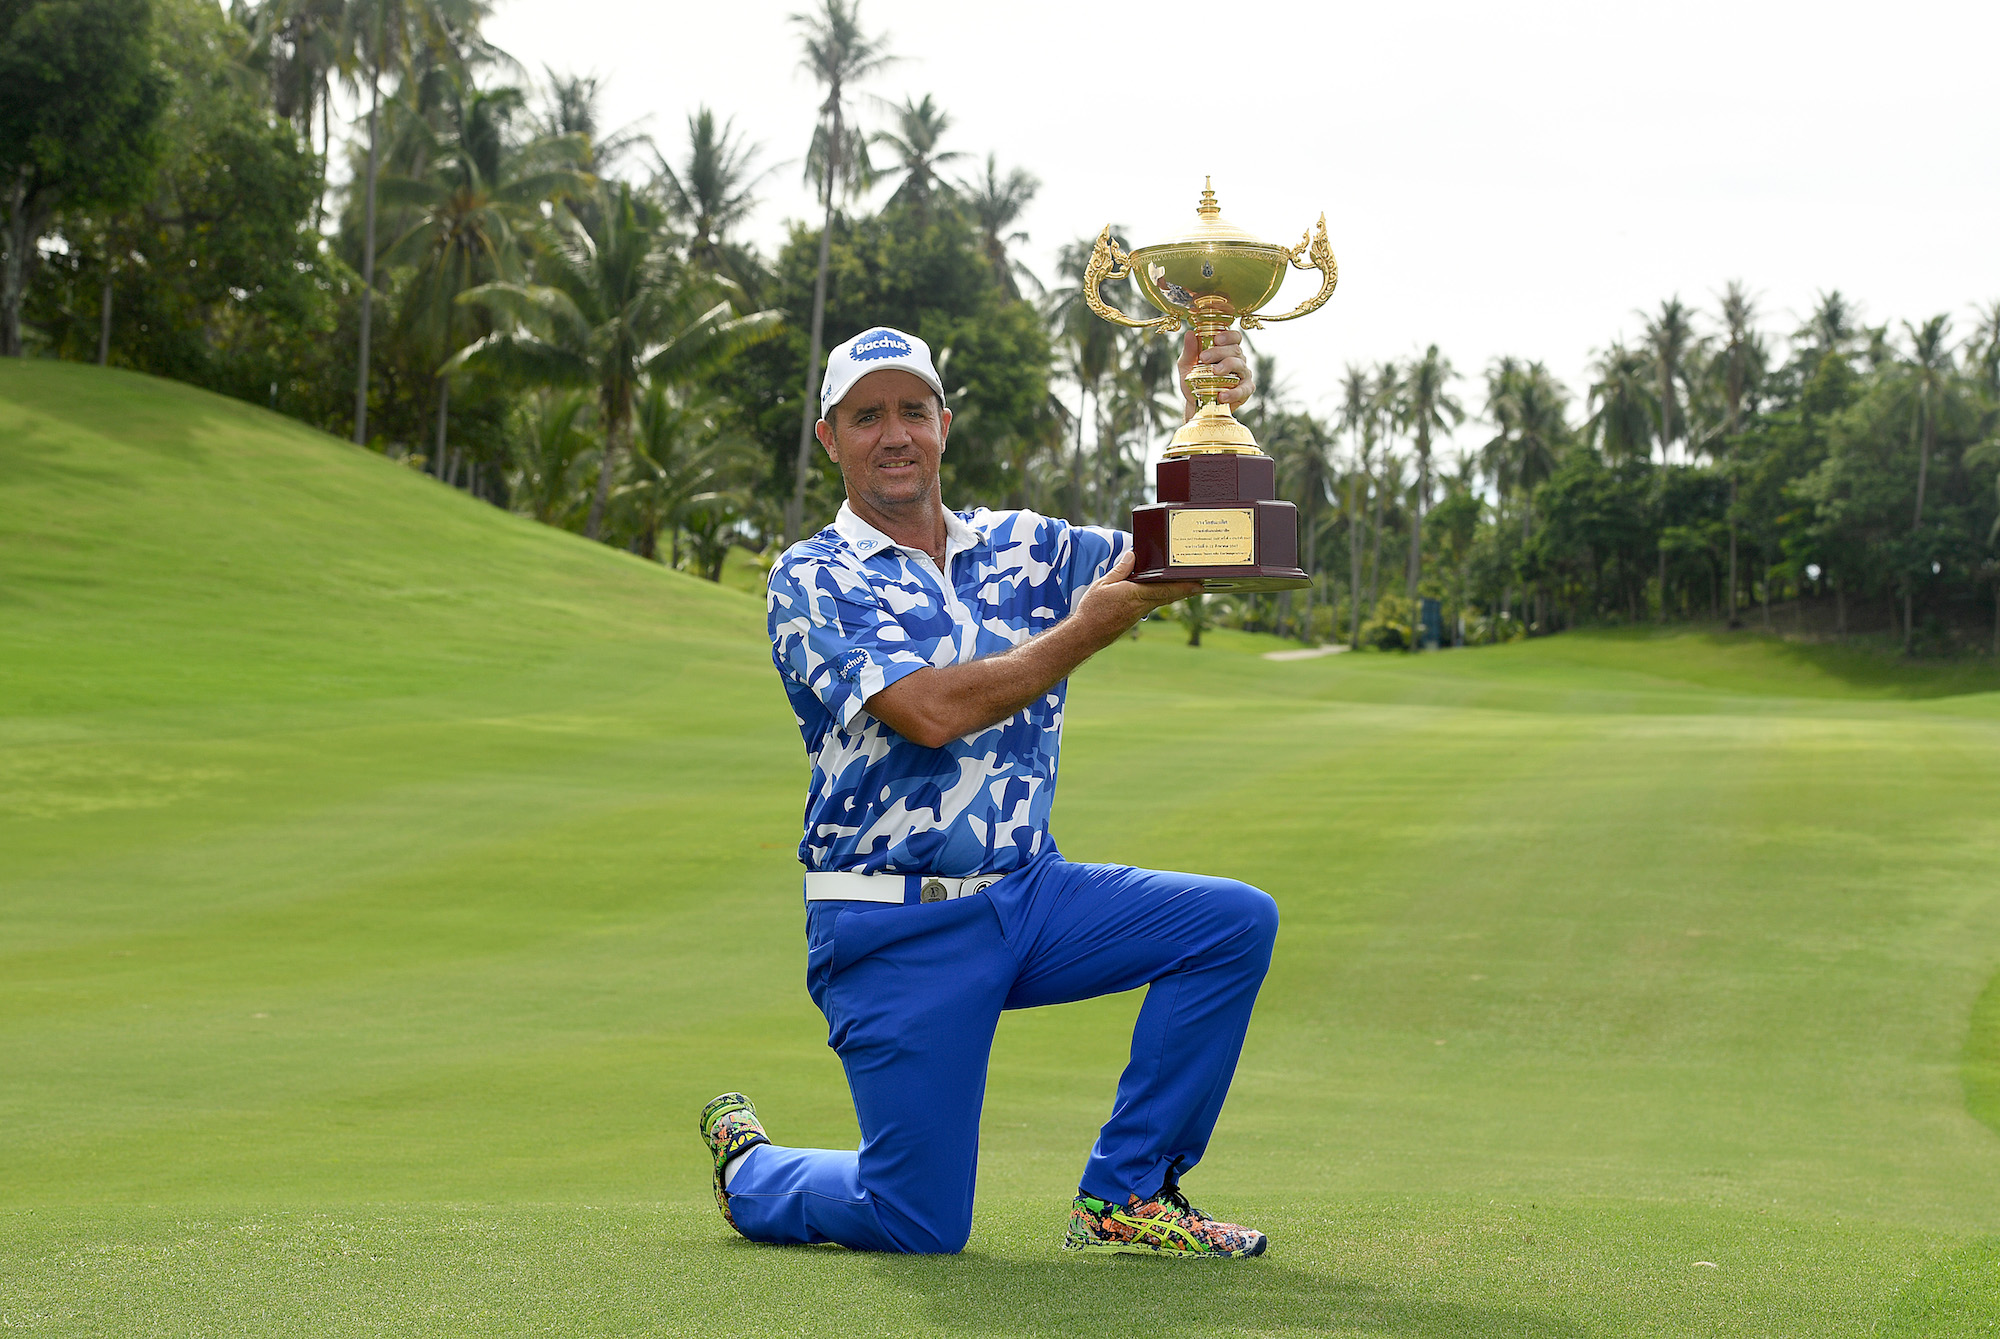 ASIAN TOUR NO. 1 HEND AIMS TO MAINTAIN TITLE REIGN AT QUEEN’S CUP